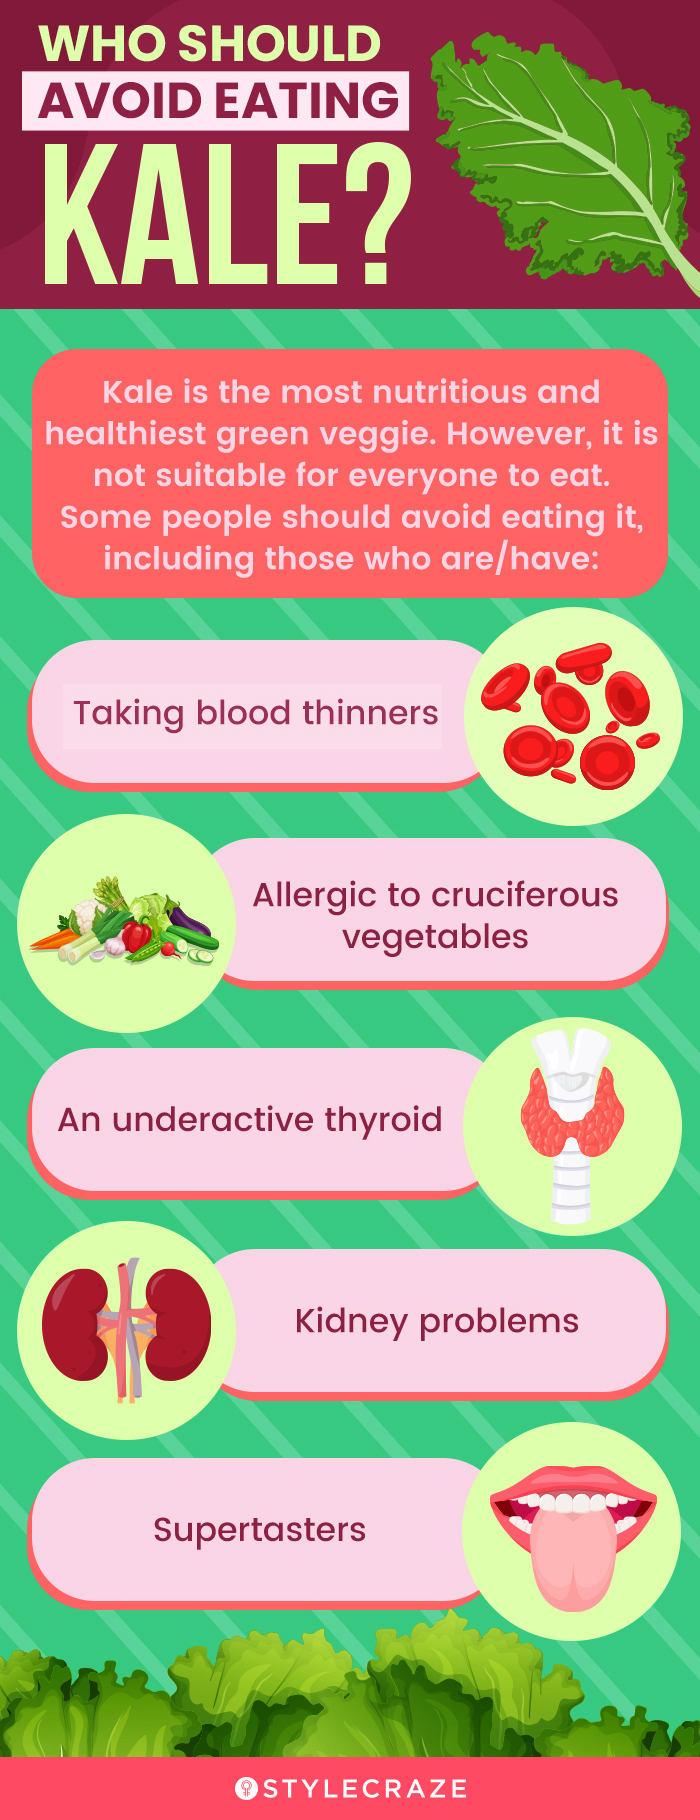 who should avoid eating kale (infographic)